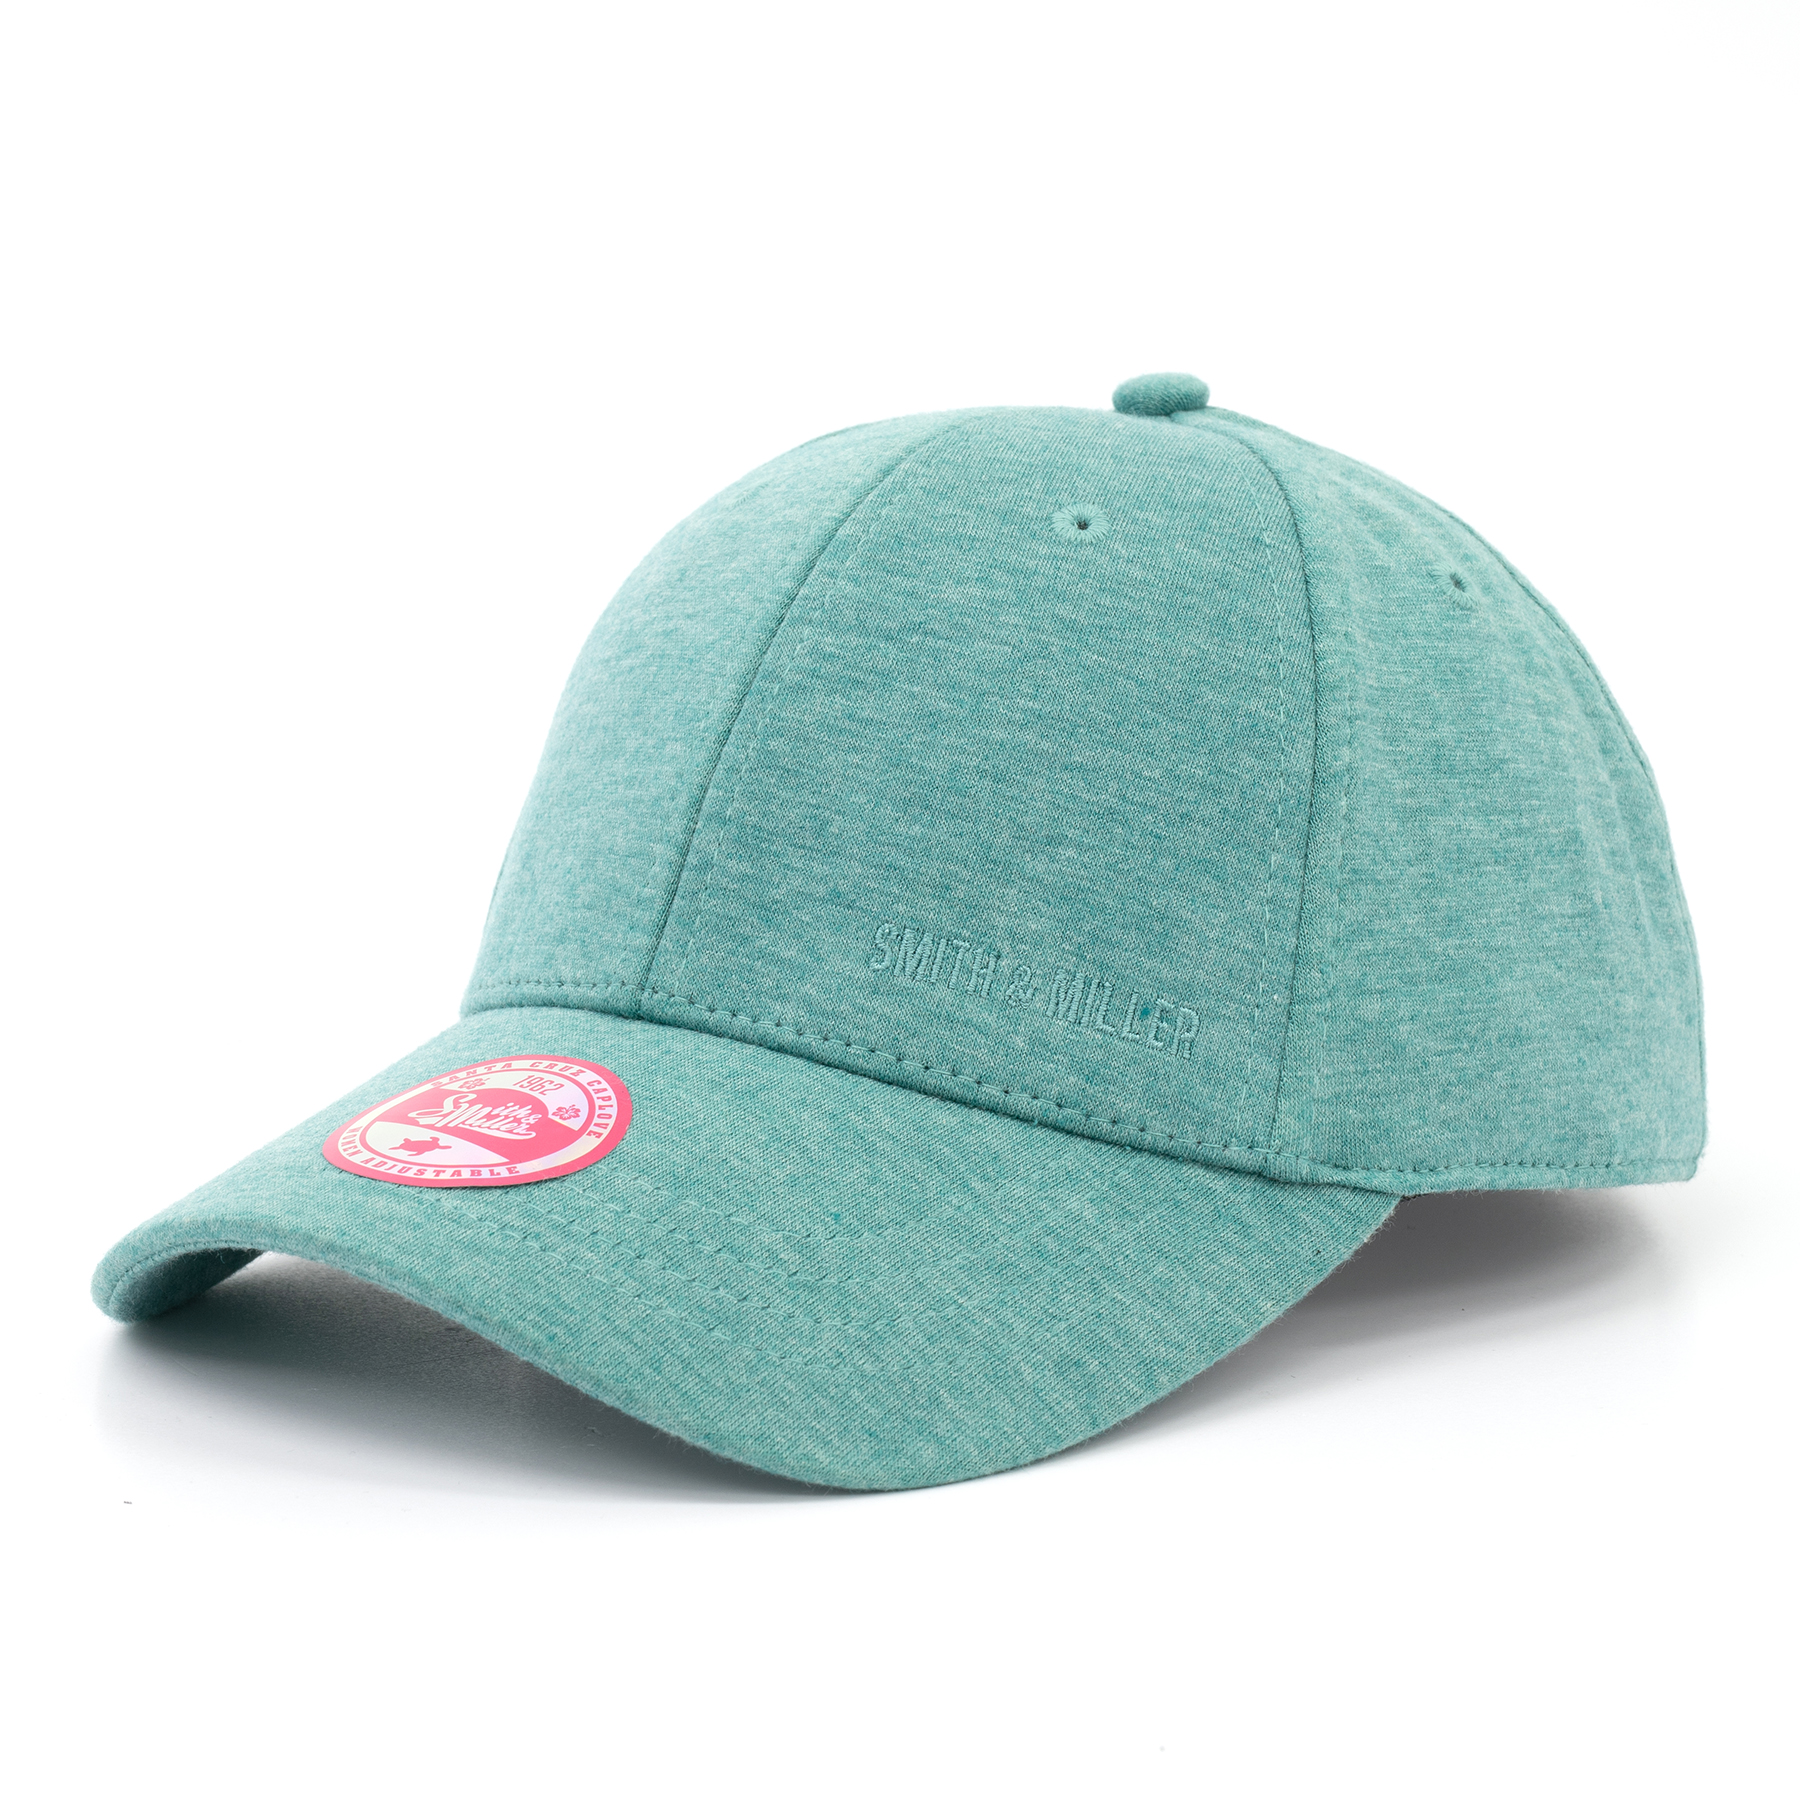 Smith & Miller Jersey-M-C Women Curved Cap, turquoise